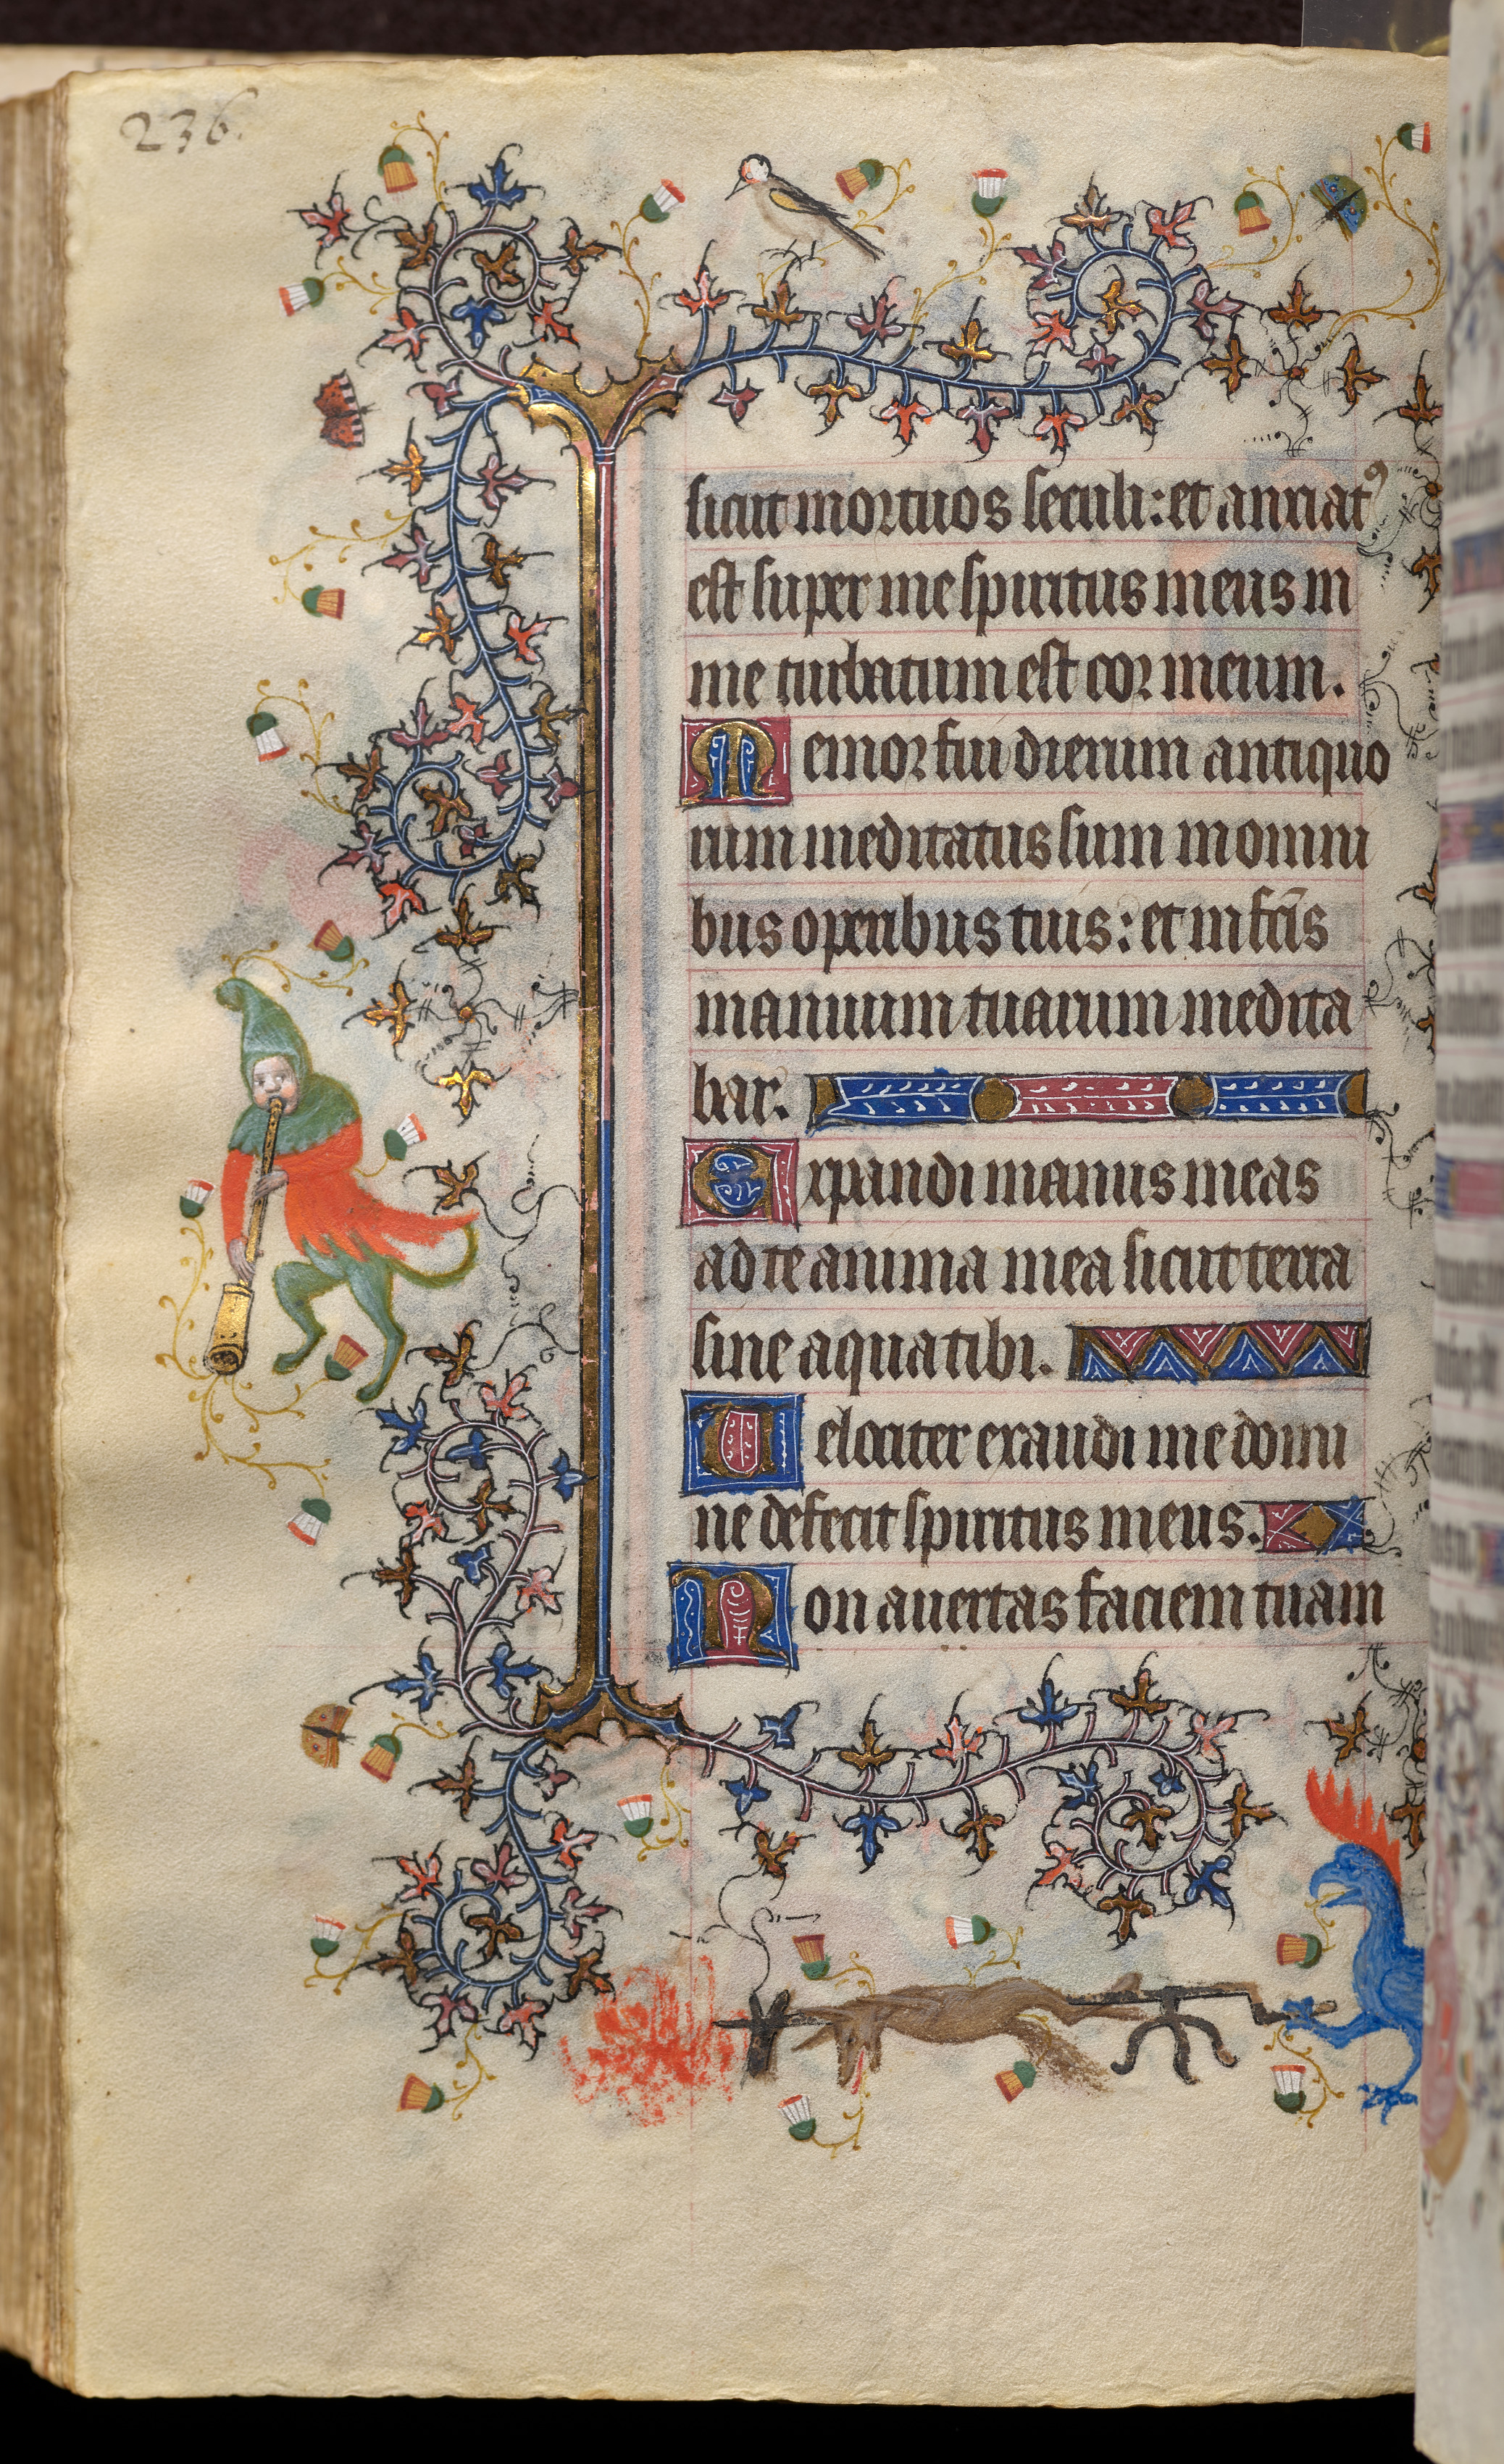 Hours of Charles the Noble, King of Navarre (1361-1425): fol. 118v, Text